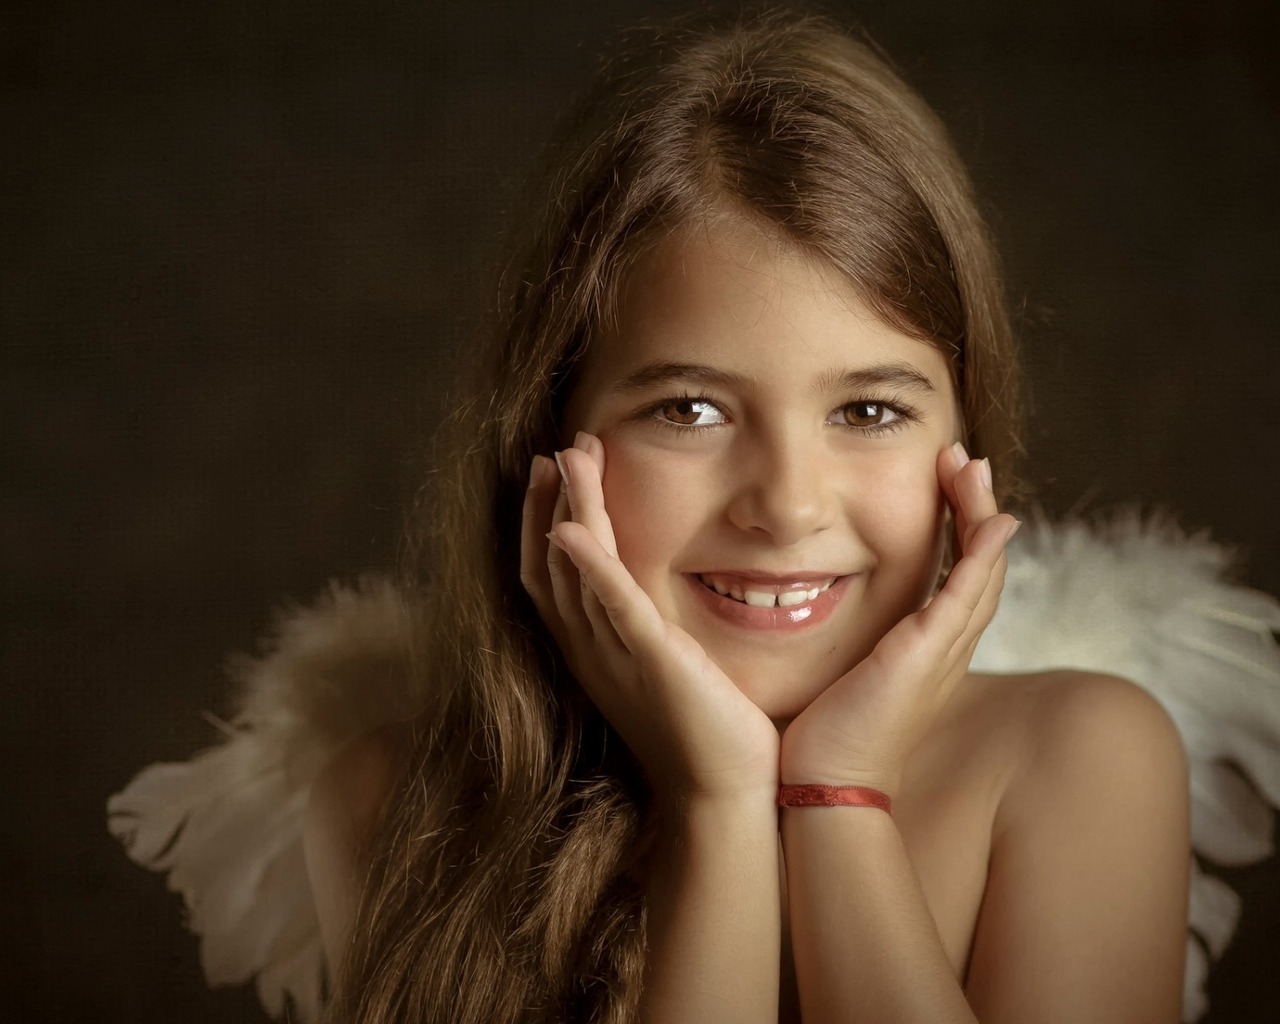 Little Angel Smile for 1280 x 1024 resolution